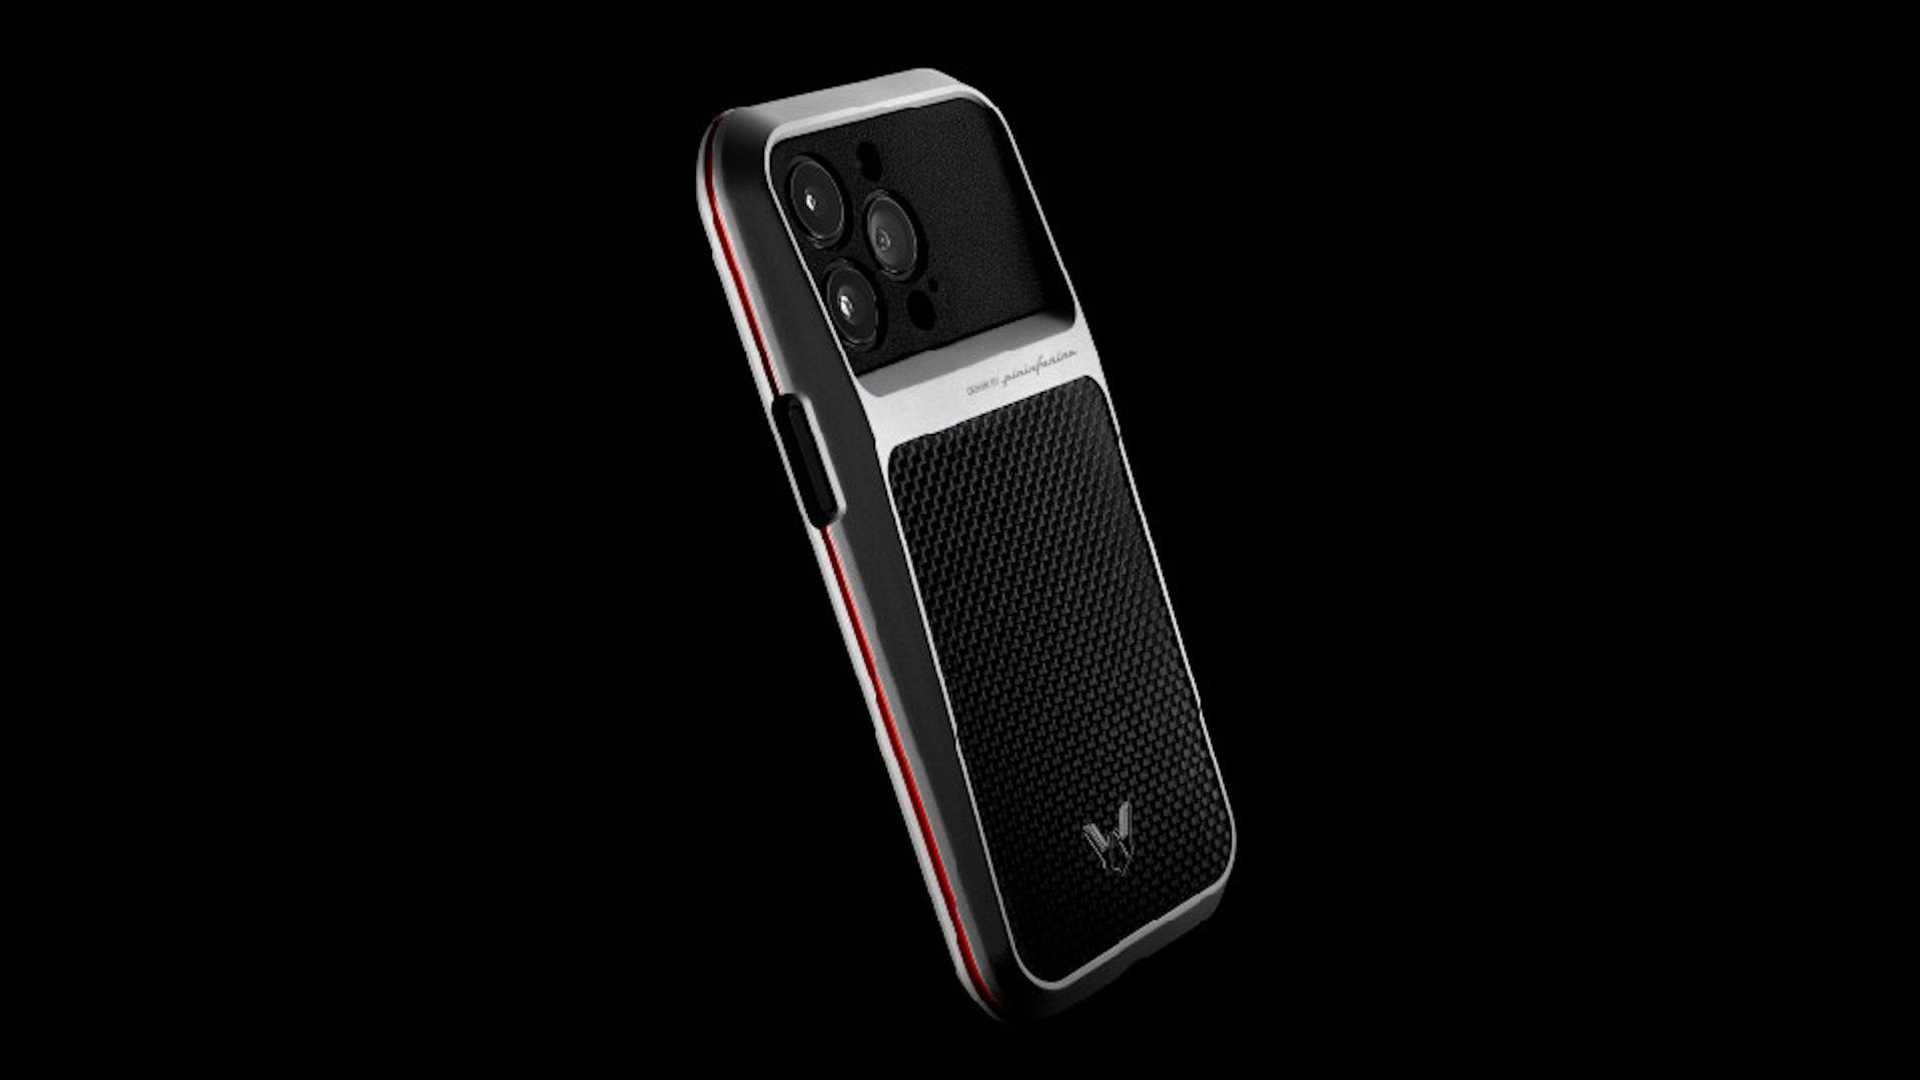 pininfarina-iphone-cases-inspired-by-modulo-concept1.jpg